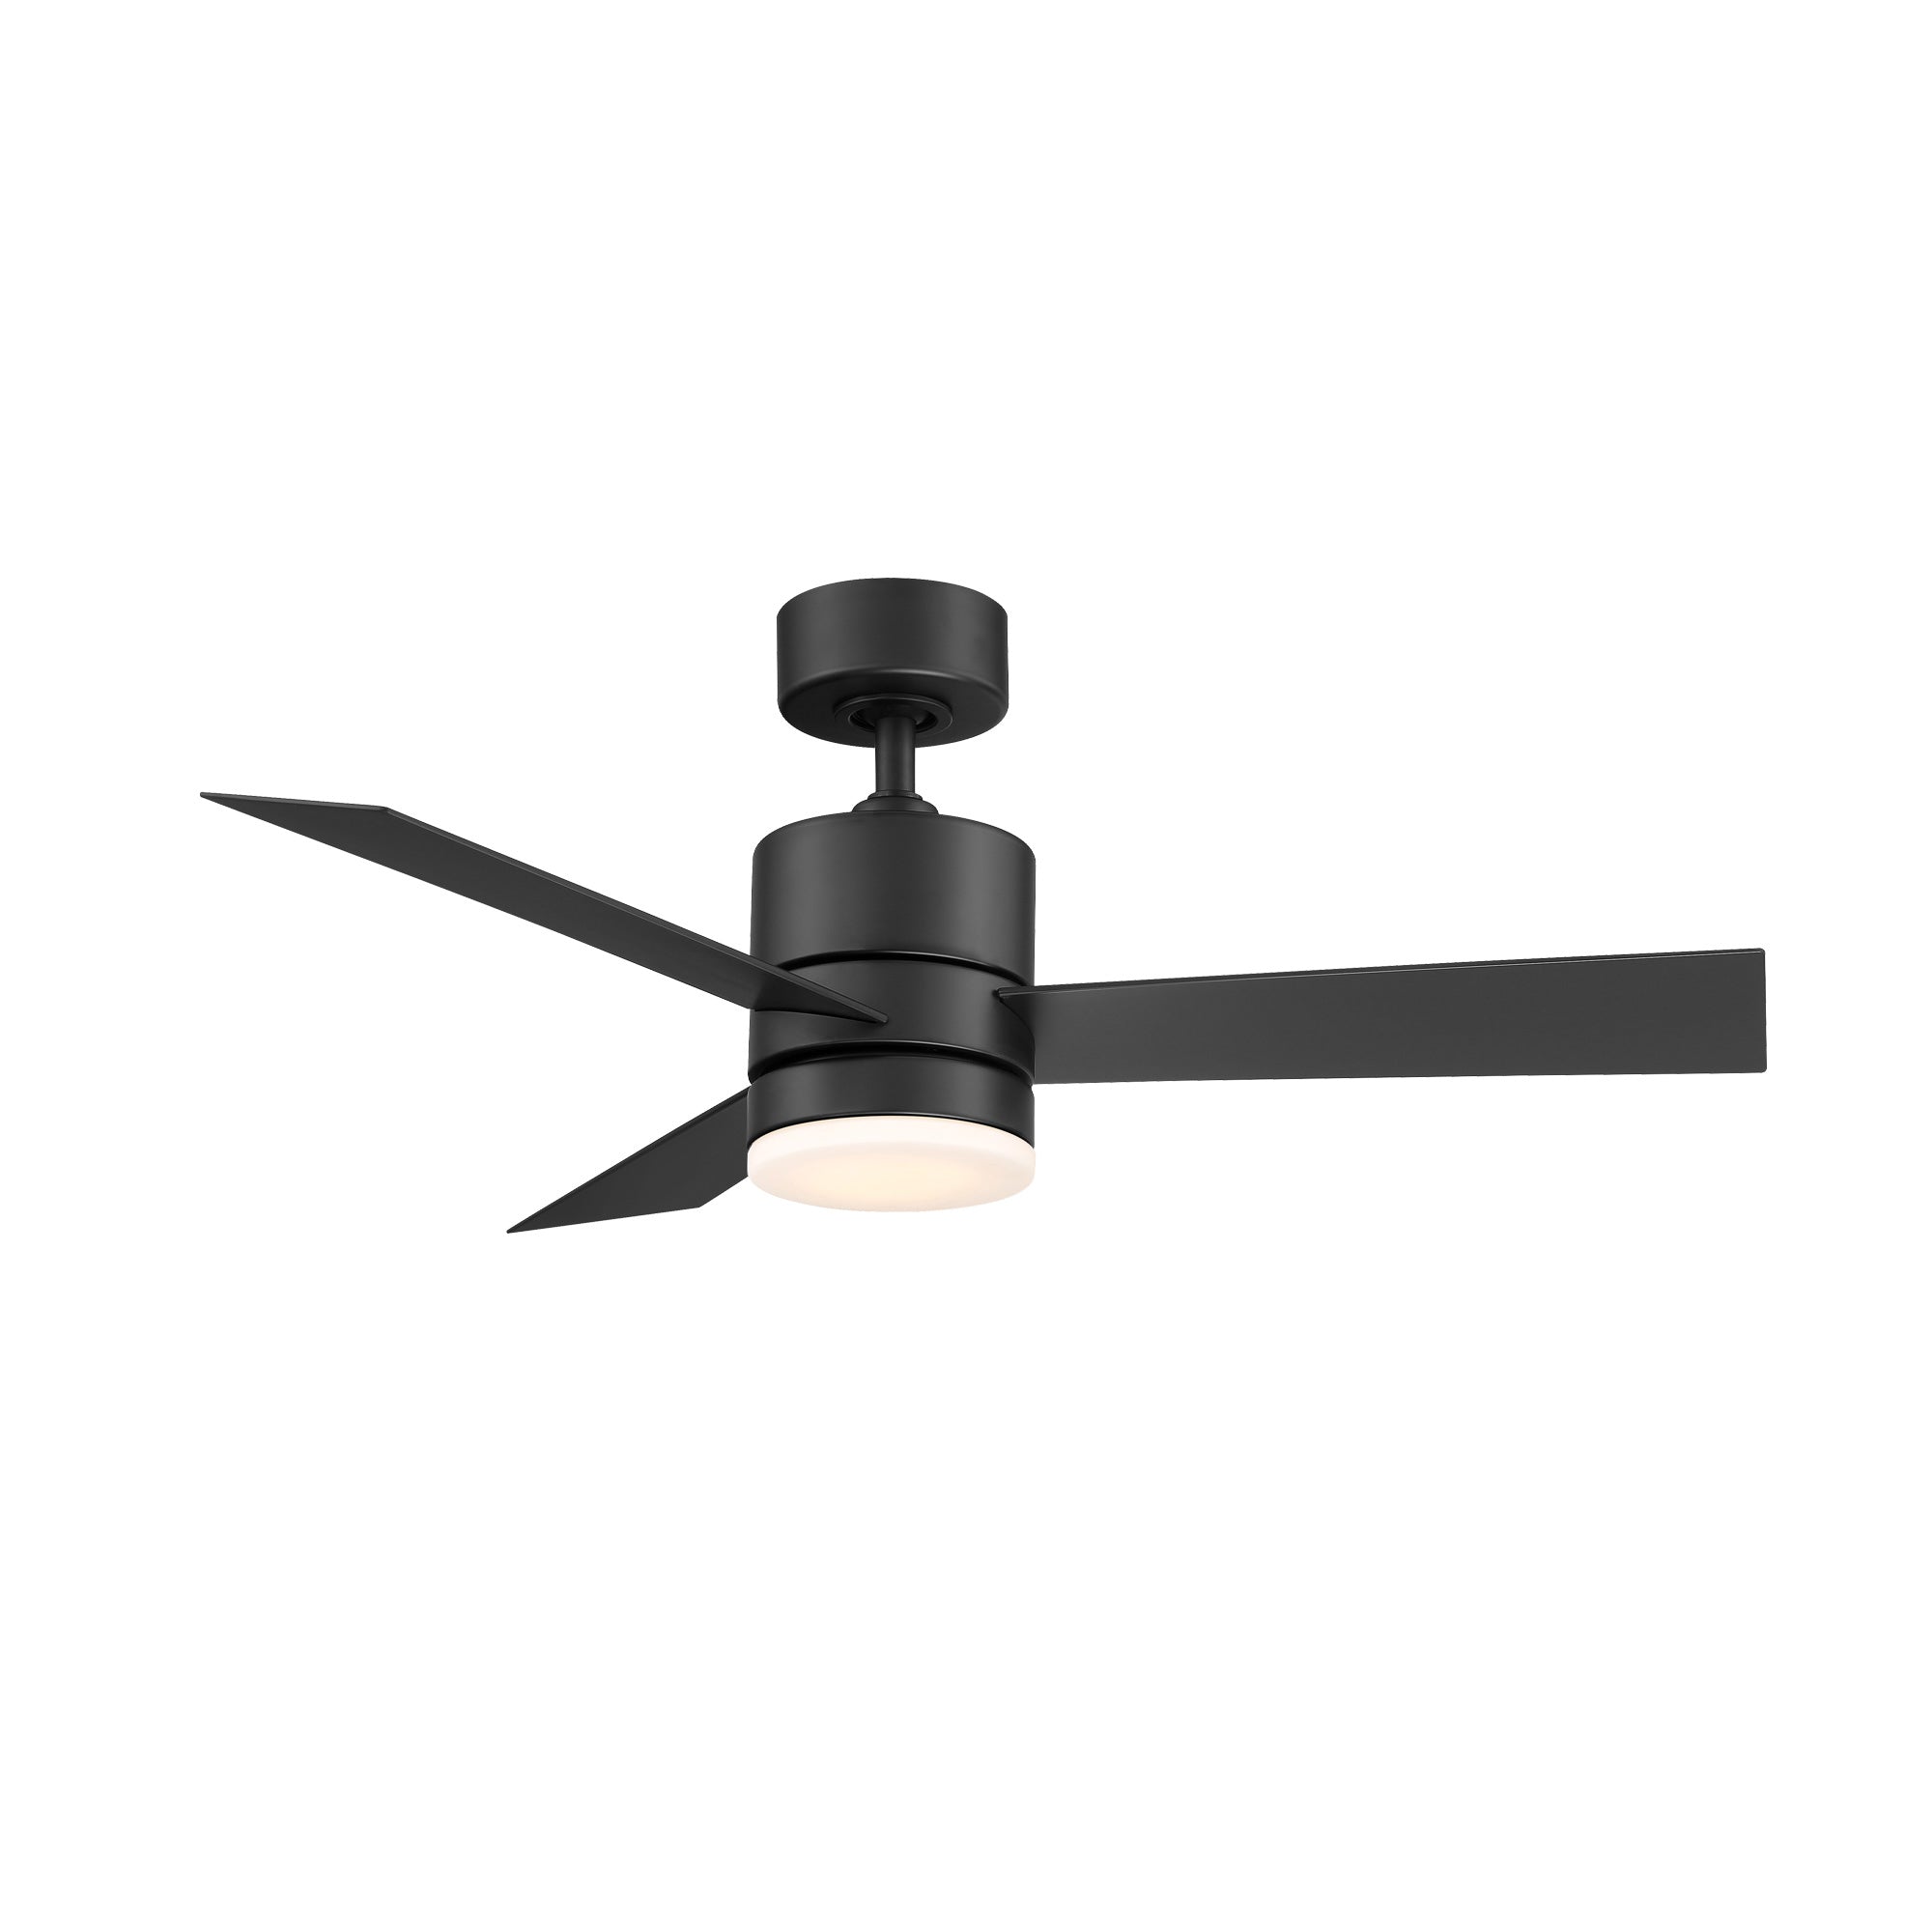 Axis Indoor/Outdoor 3-Blade 44" Smart Ceiling Fan with LED Light Kit and Remote Control